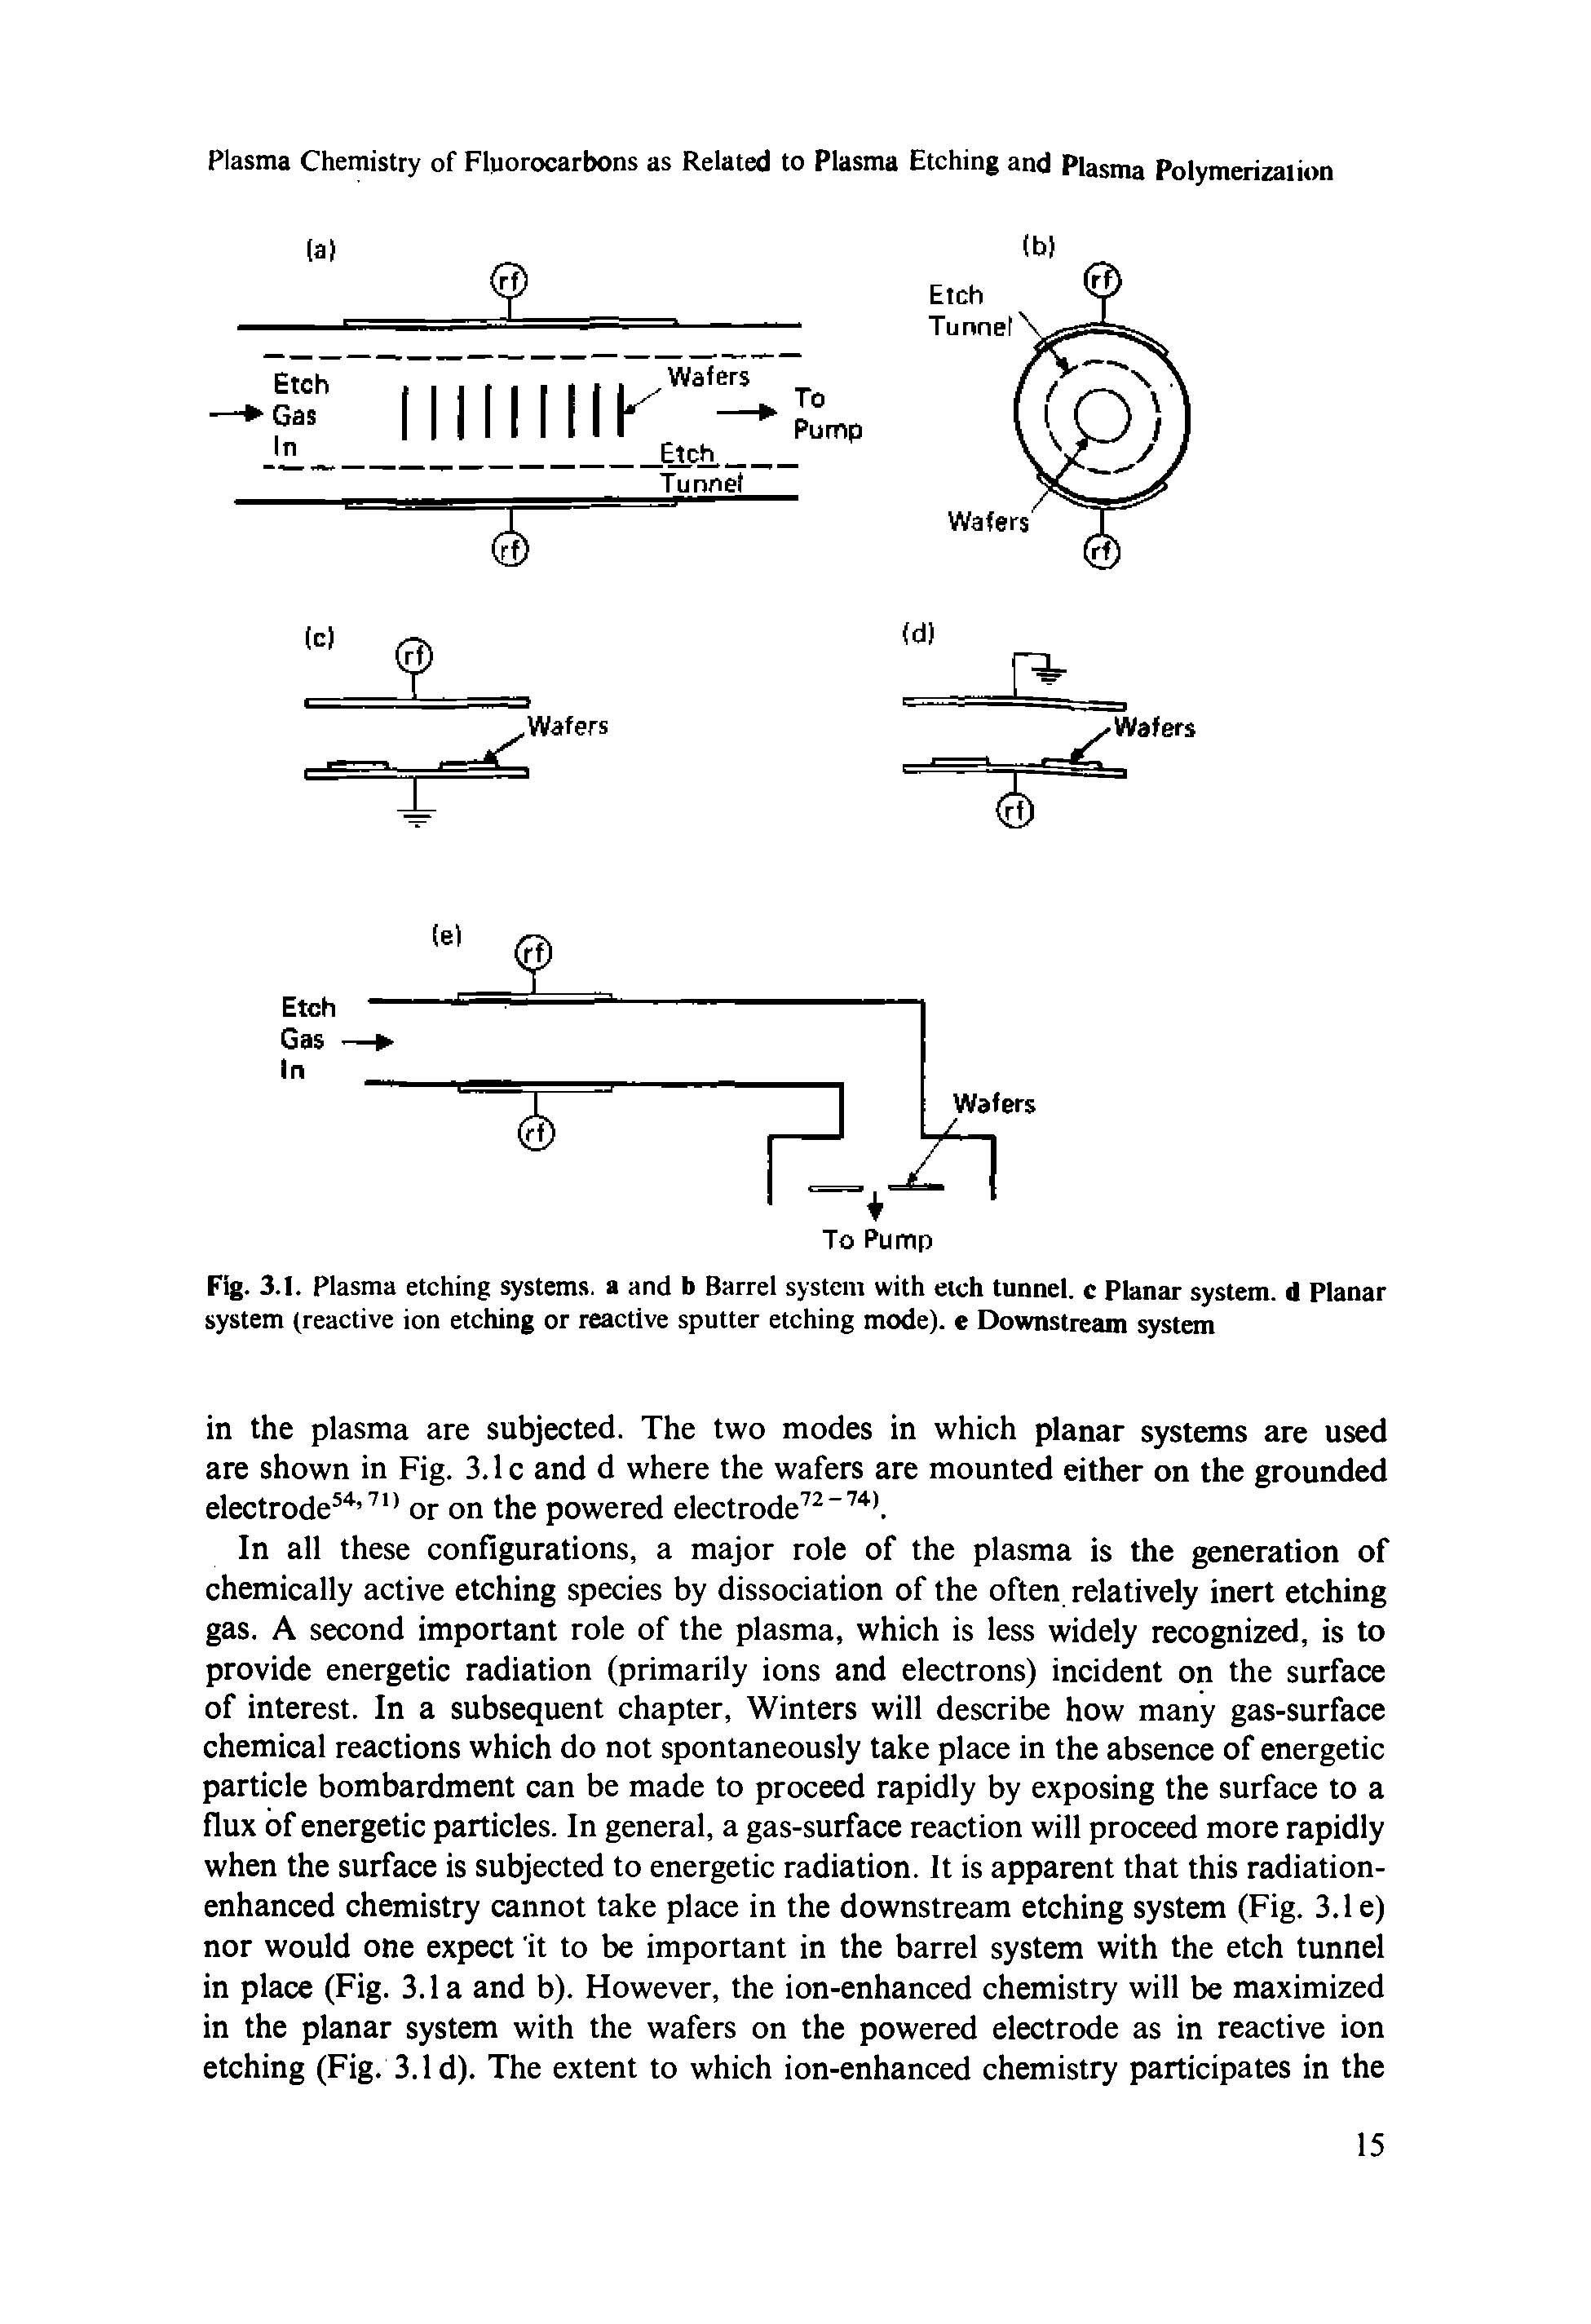 Fig. 3.1. Plasma etching systems, a and b Barrel system with etch tunnel, c Planar system, d Planar system (reactive ion etching or reactive sputter etching mode), e Downstream system...